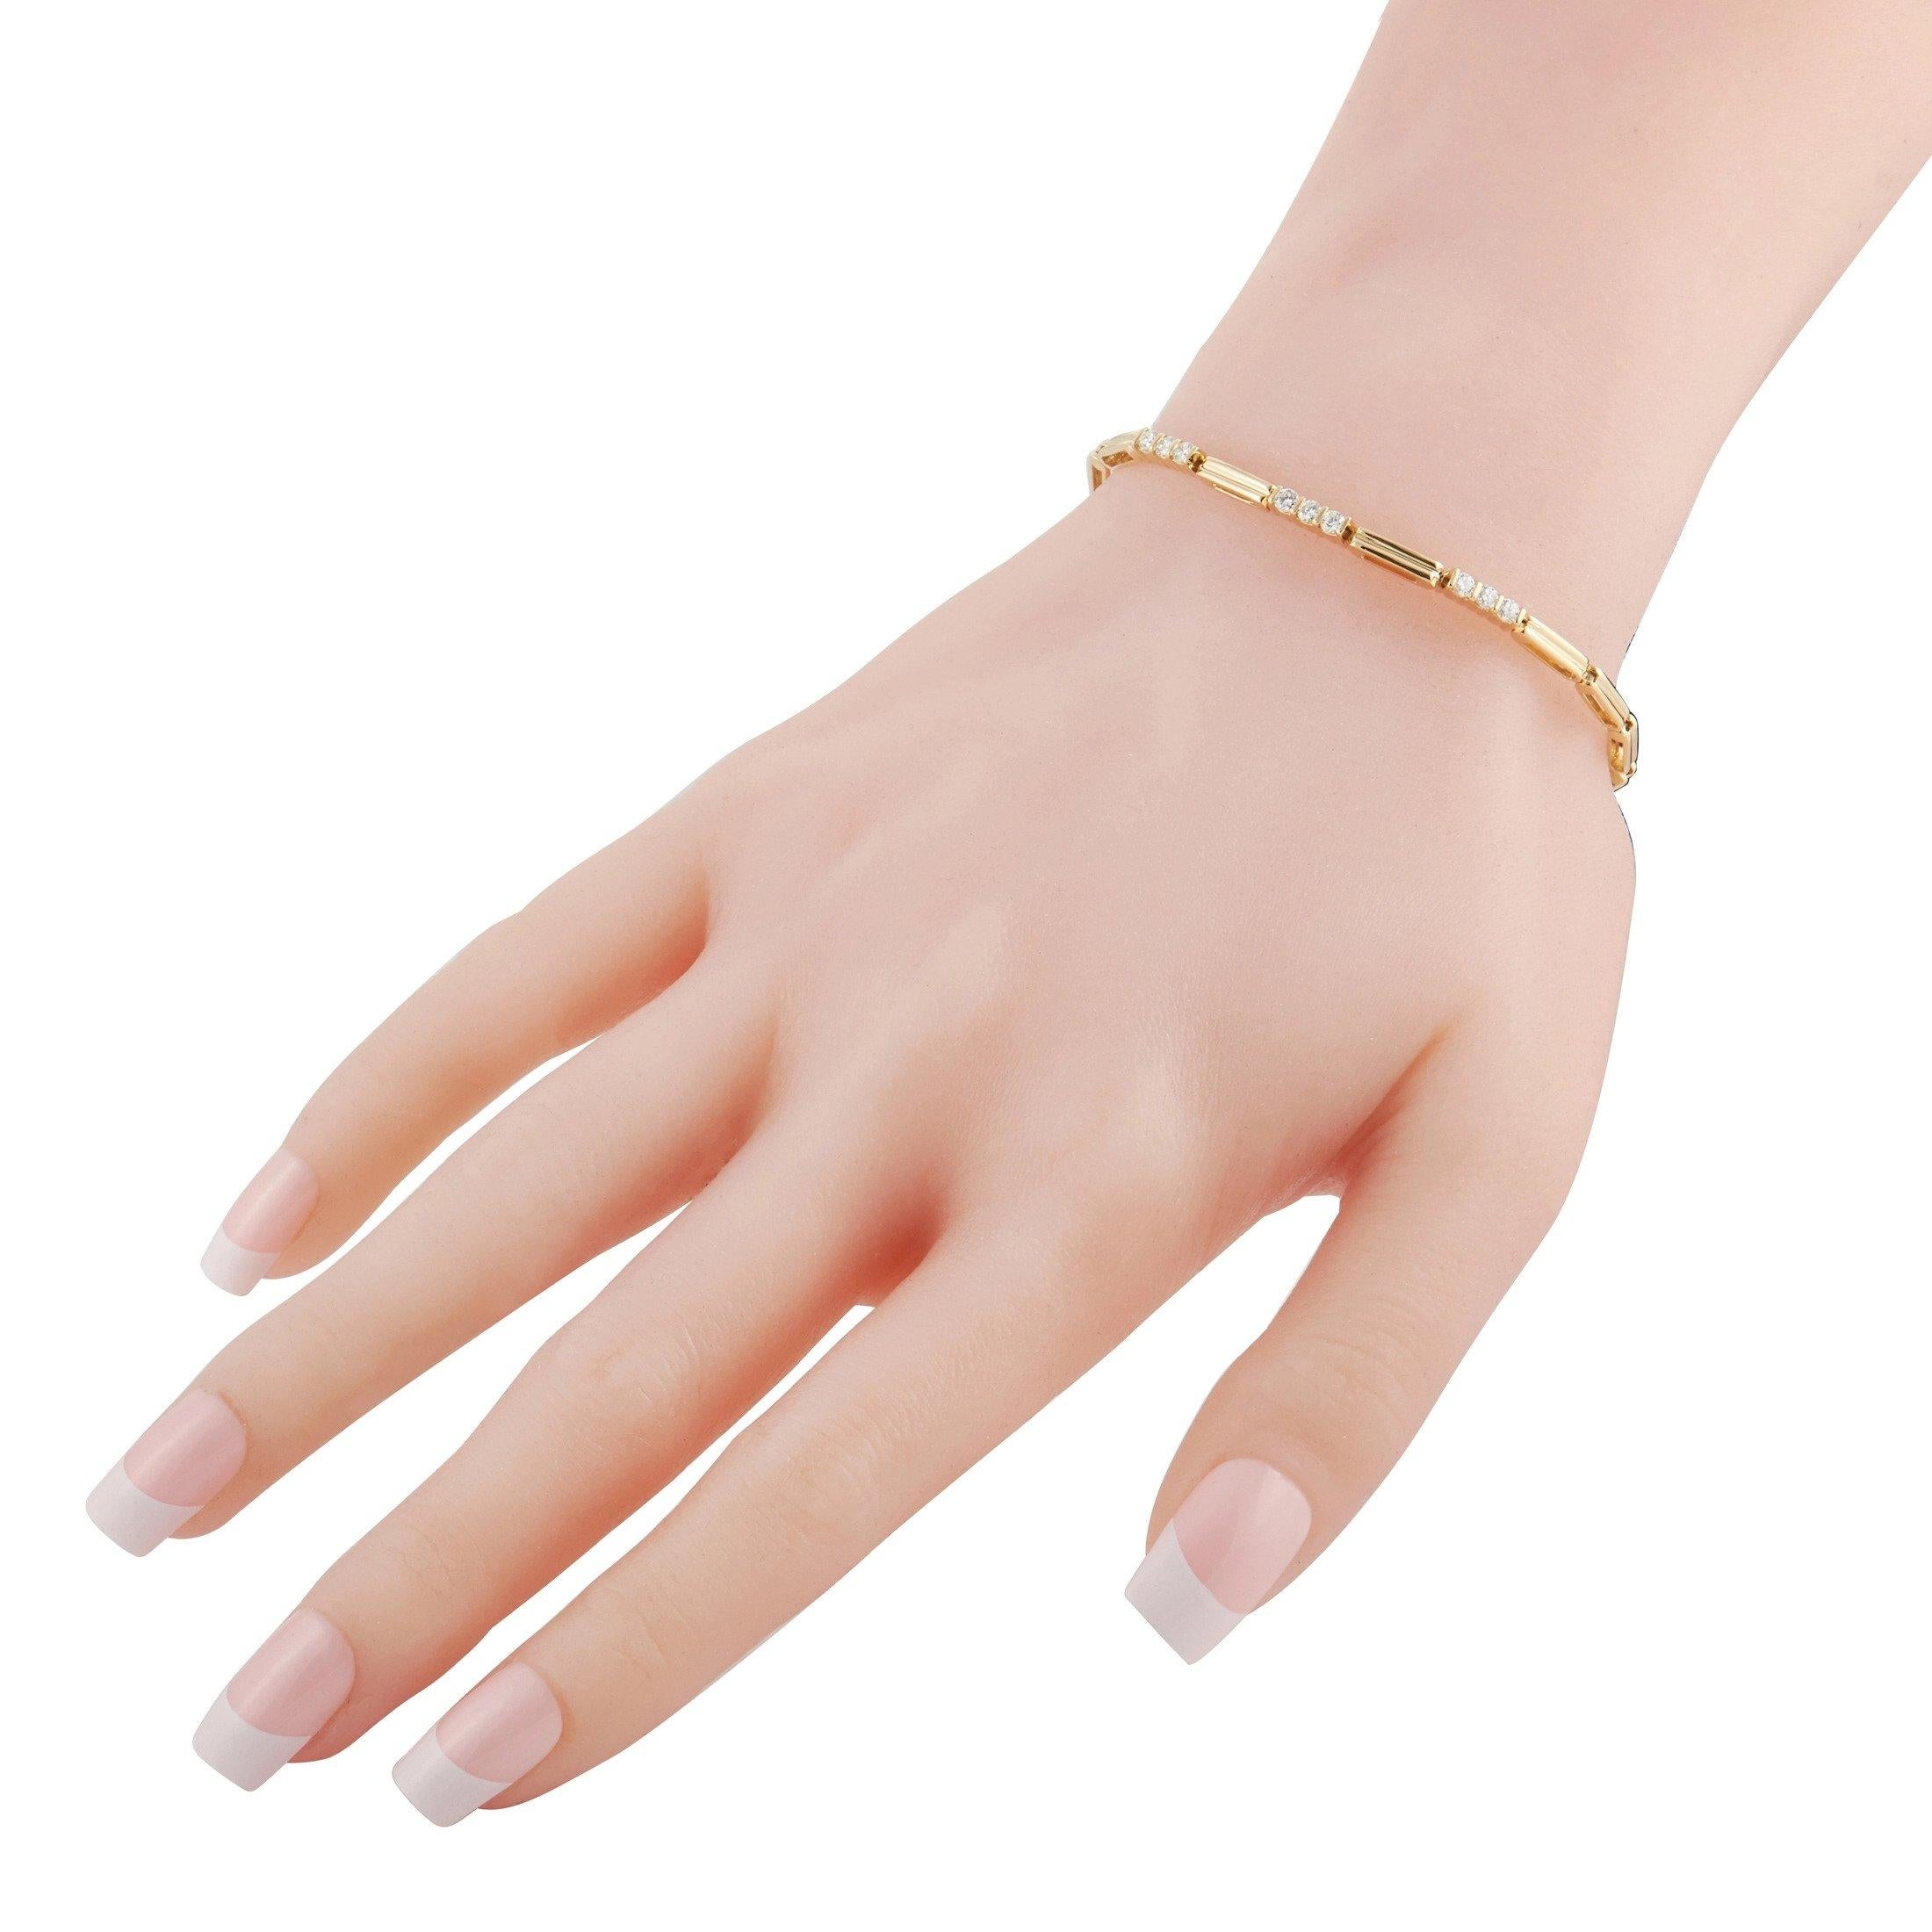 Sleek and simple in design, this 18K Yellow Gold bracelet from Tiffany & Co. allows you to effortlessly add a touch of luxury to your everyday wardrobe. Although this 7” wide piece possesses an inherently low profile, it’s accented by glittering